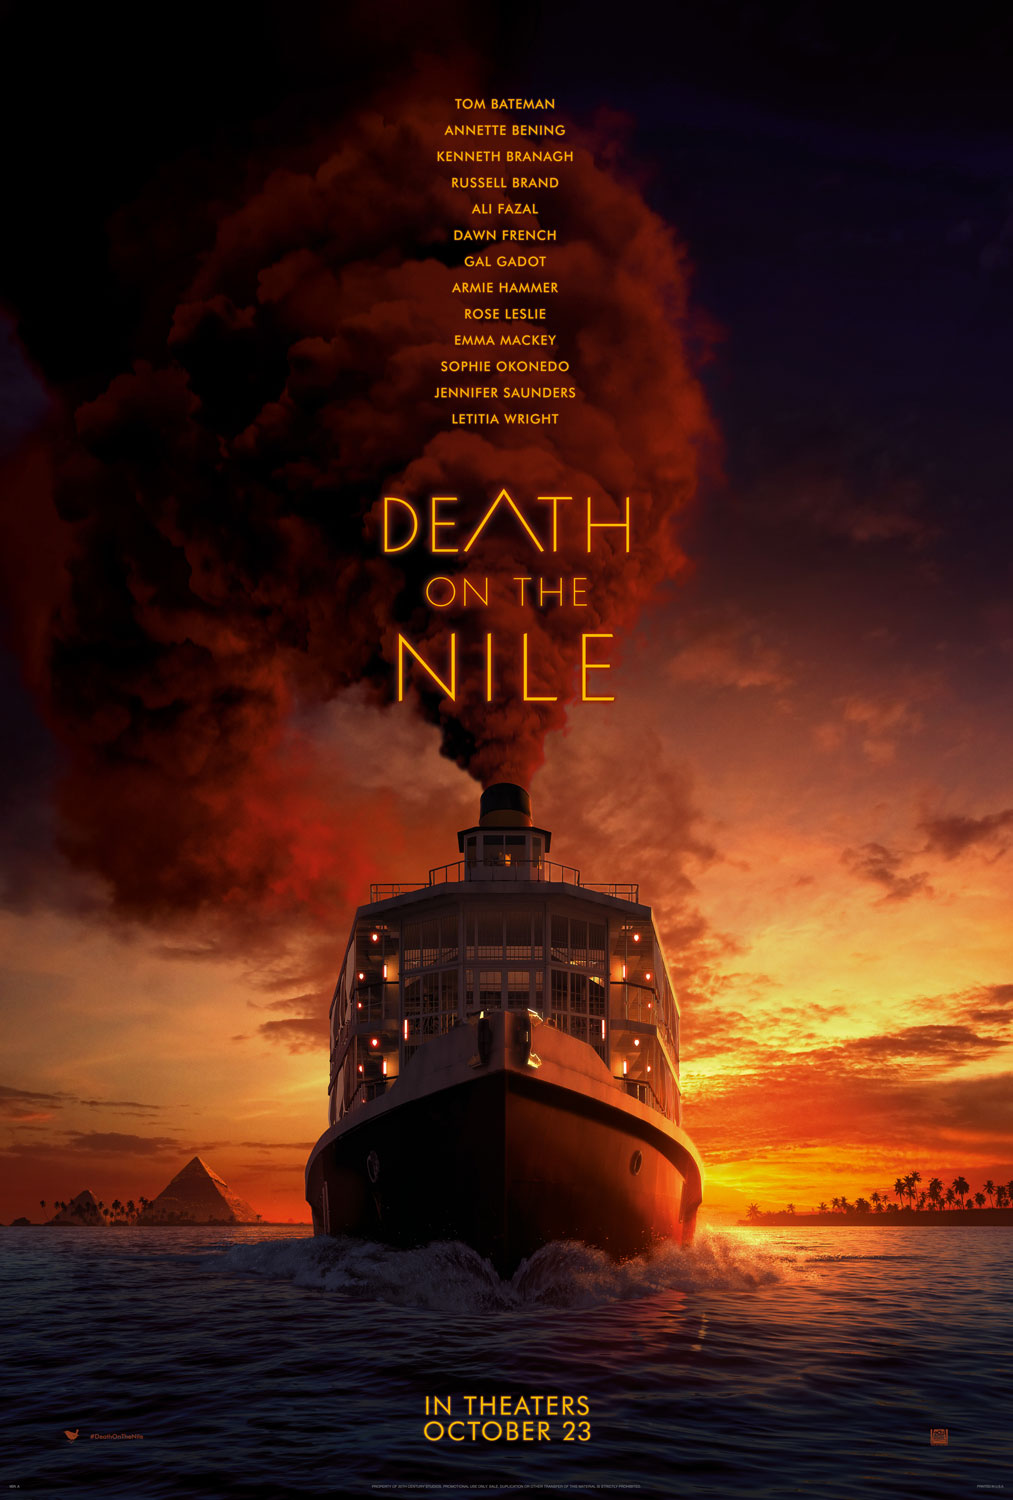 DEATH ON THE NILE - The Art of VFX